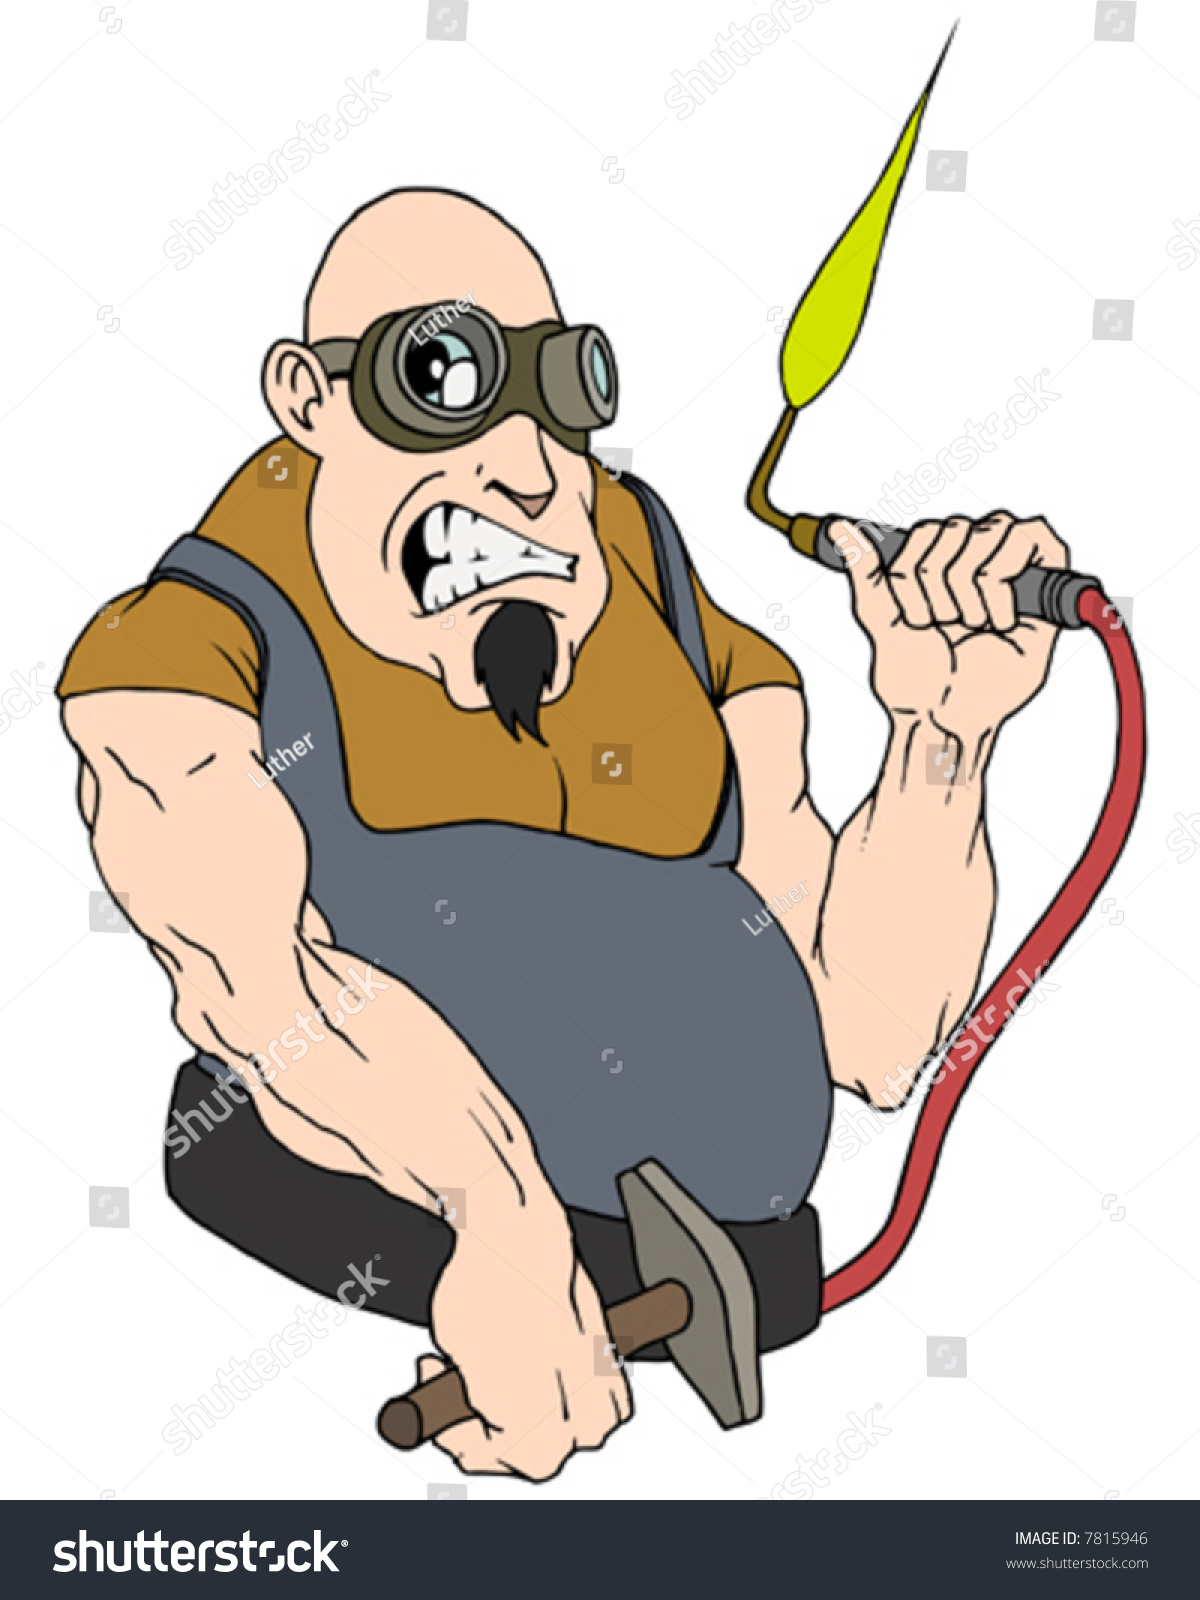 clipart iron worker - photo #12